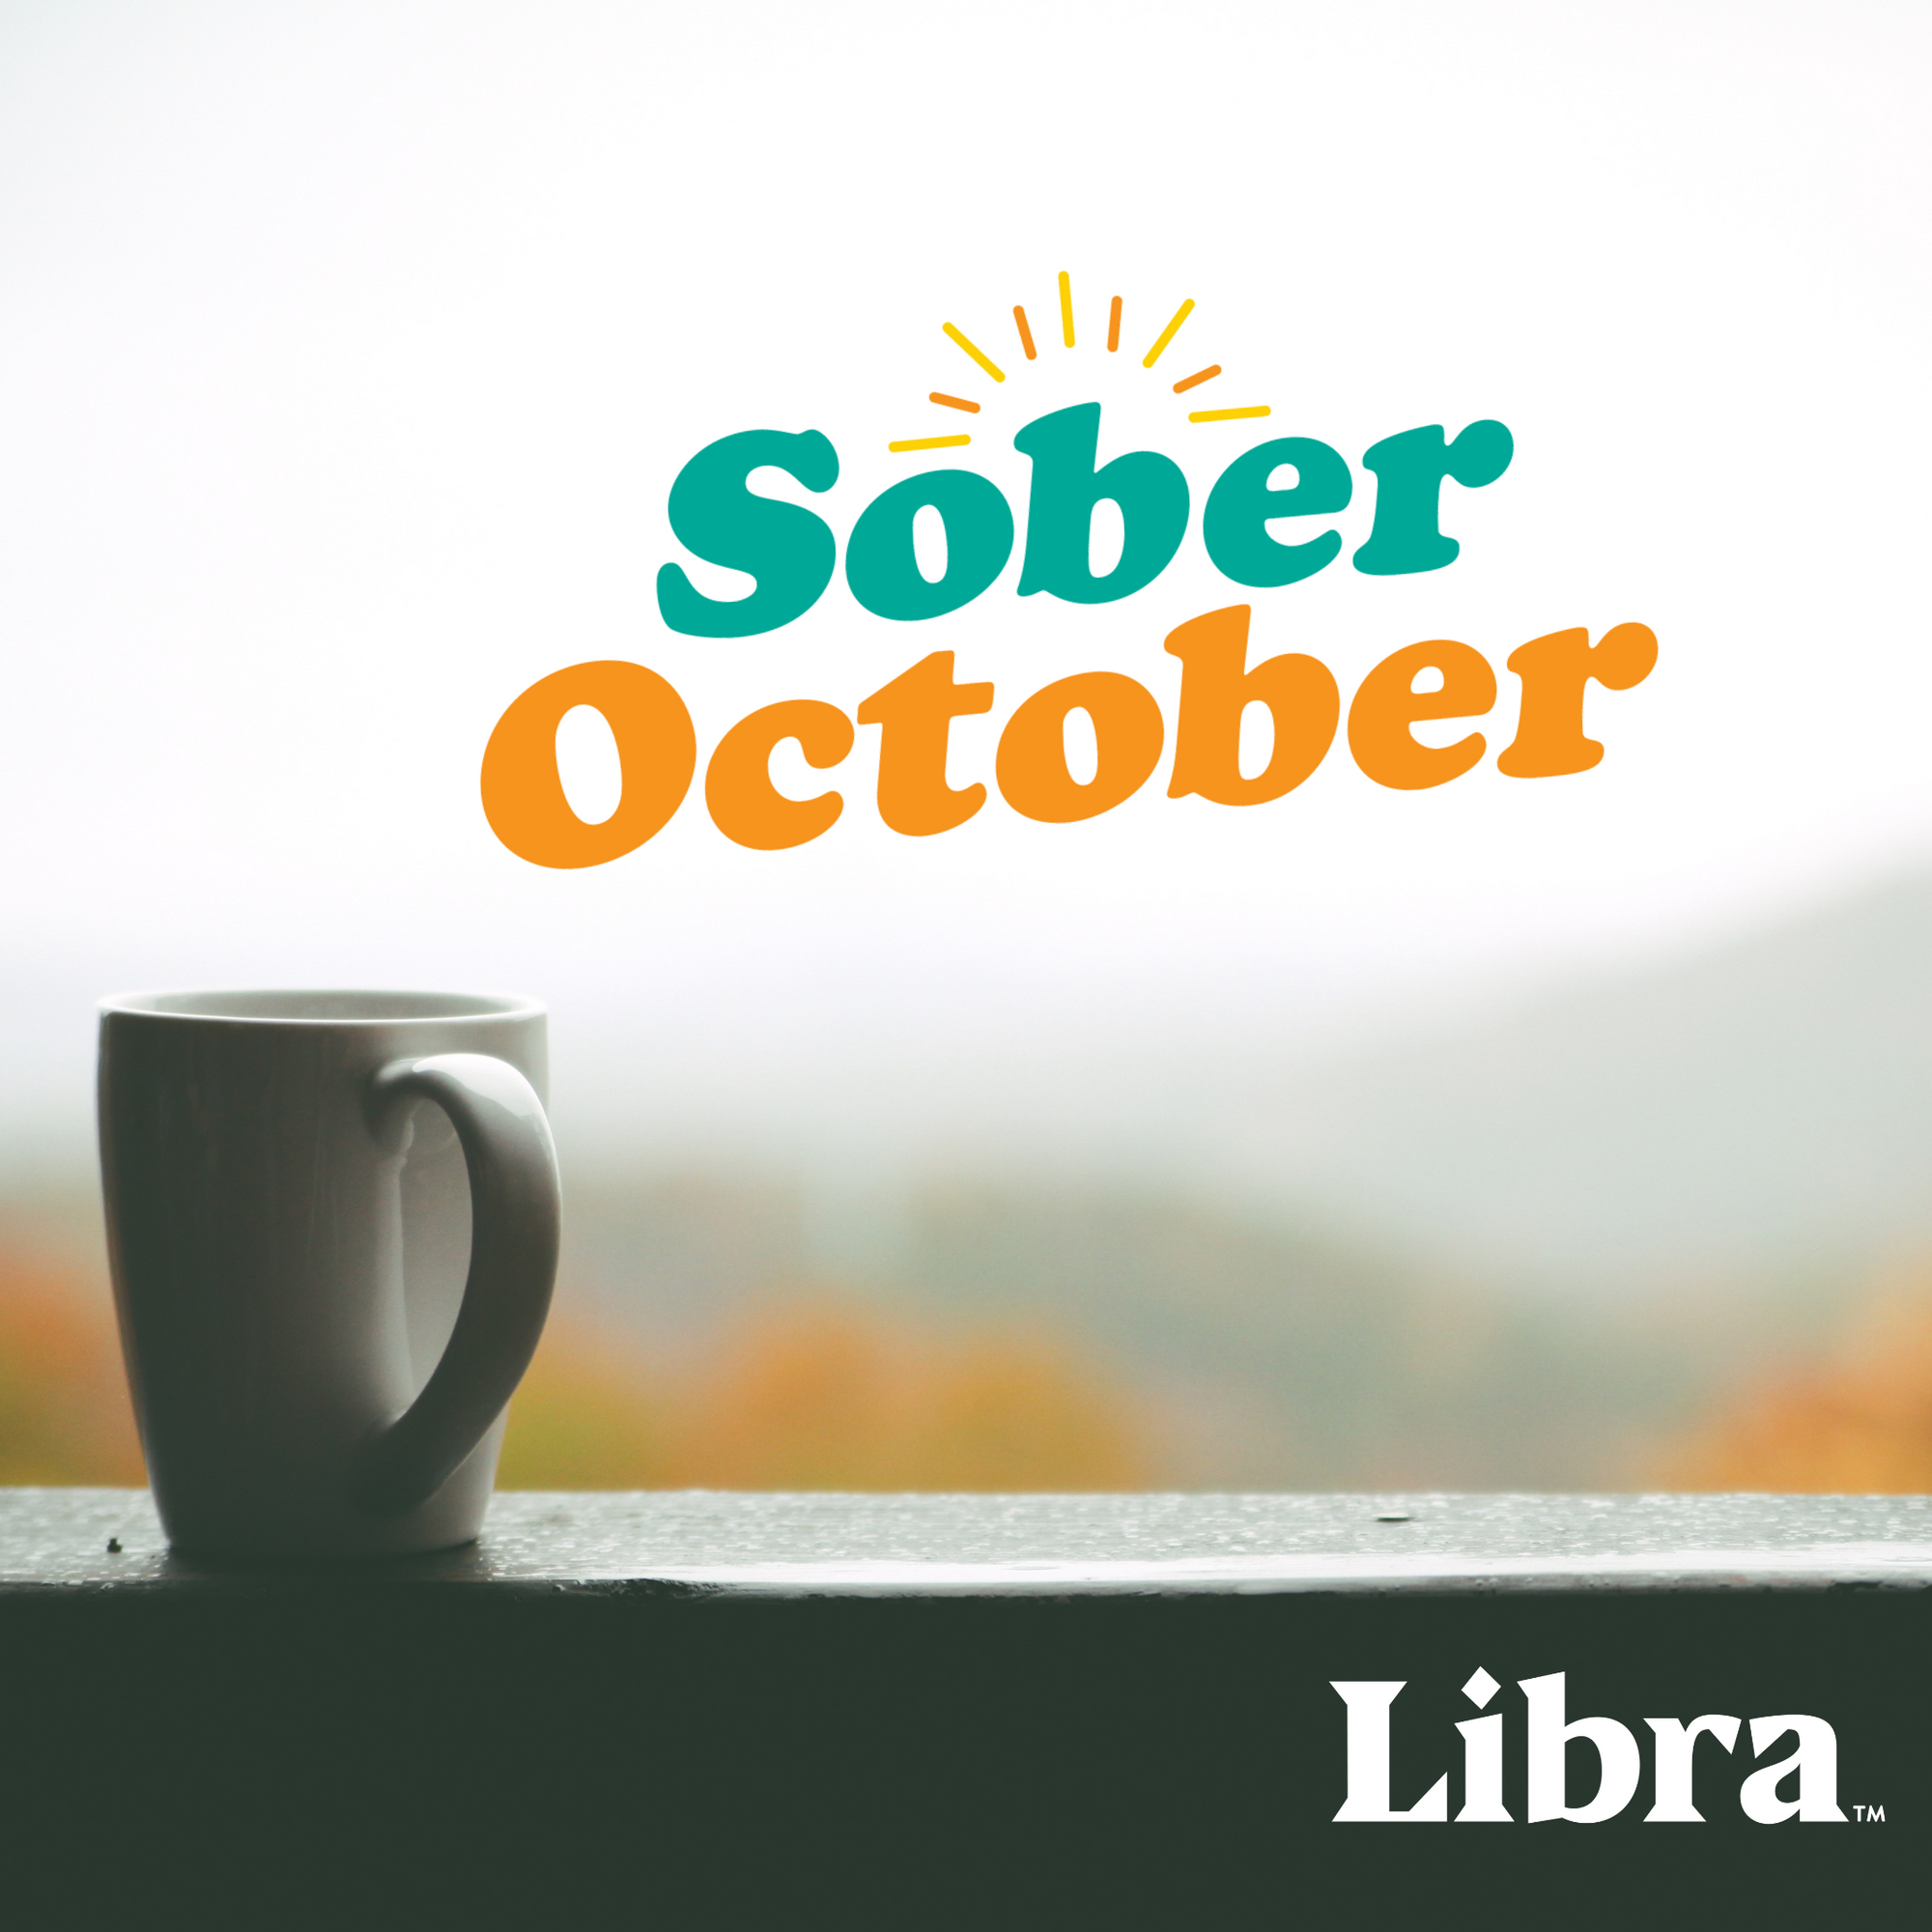 Sober October Is Almost Here!